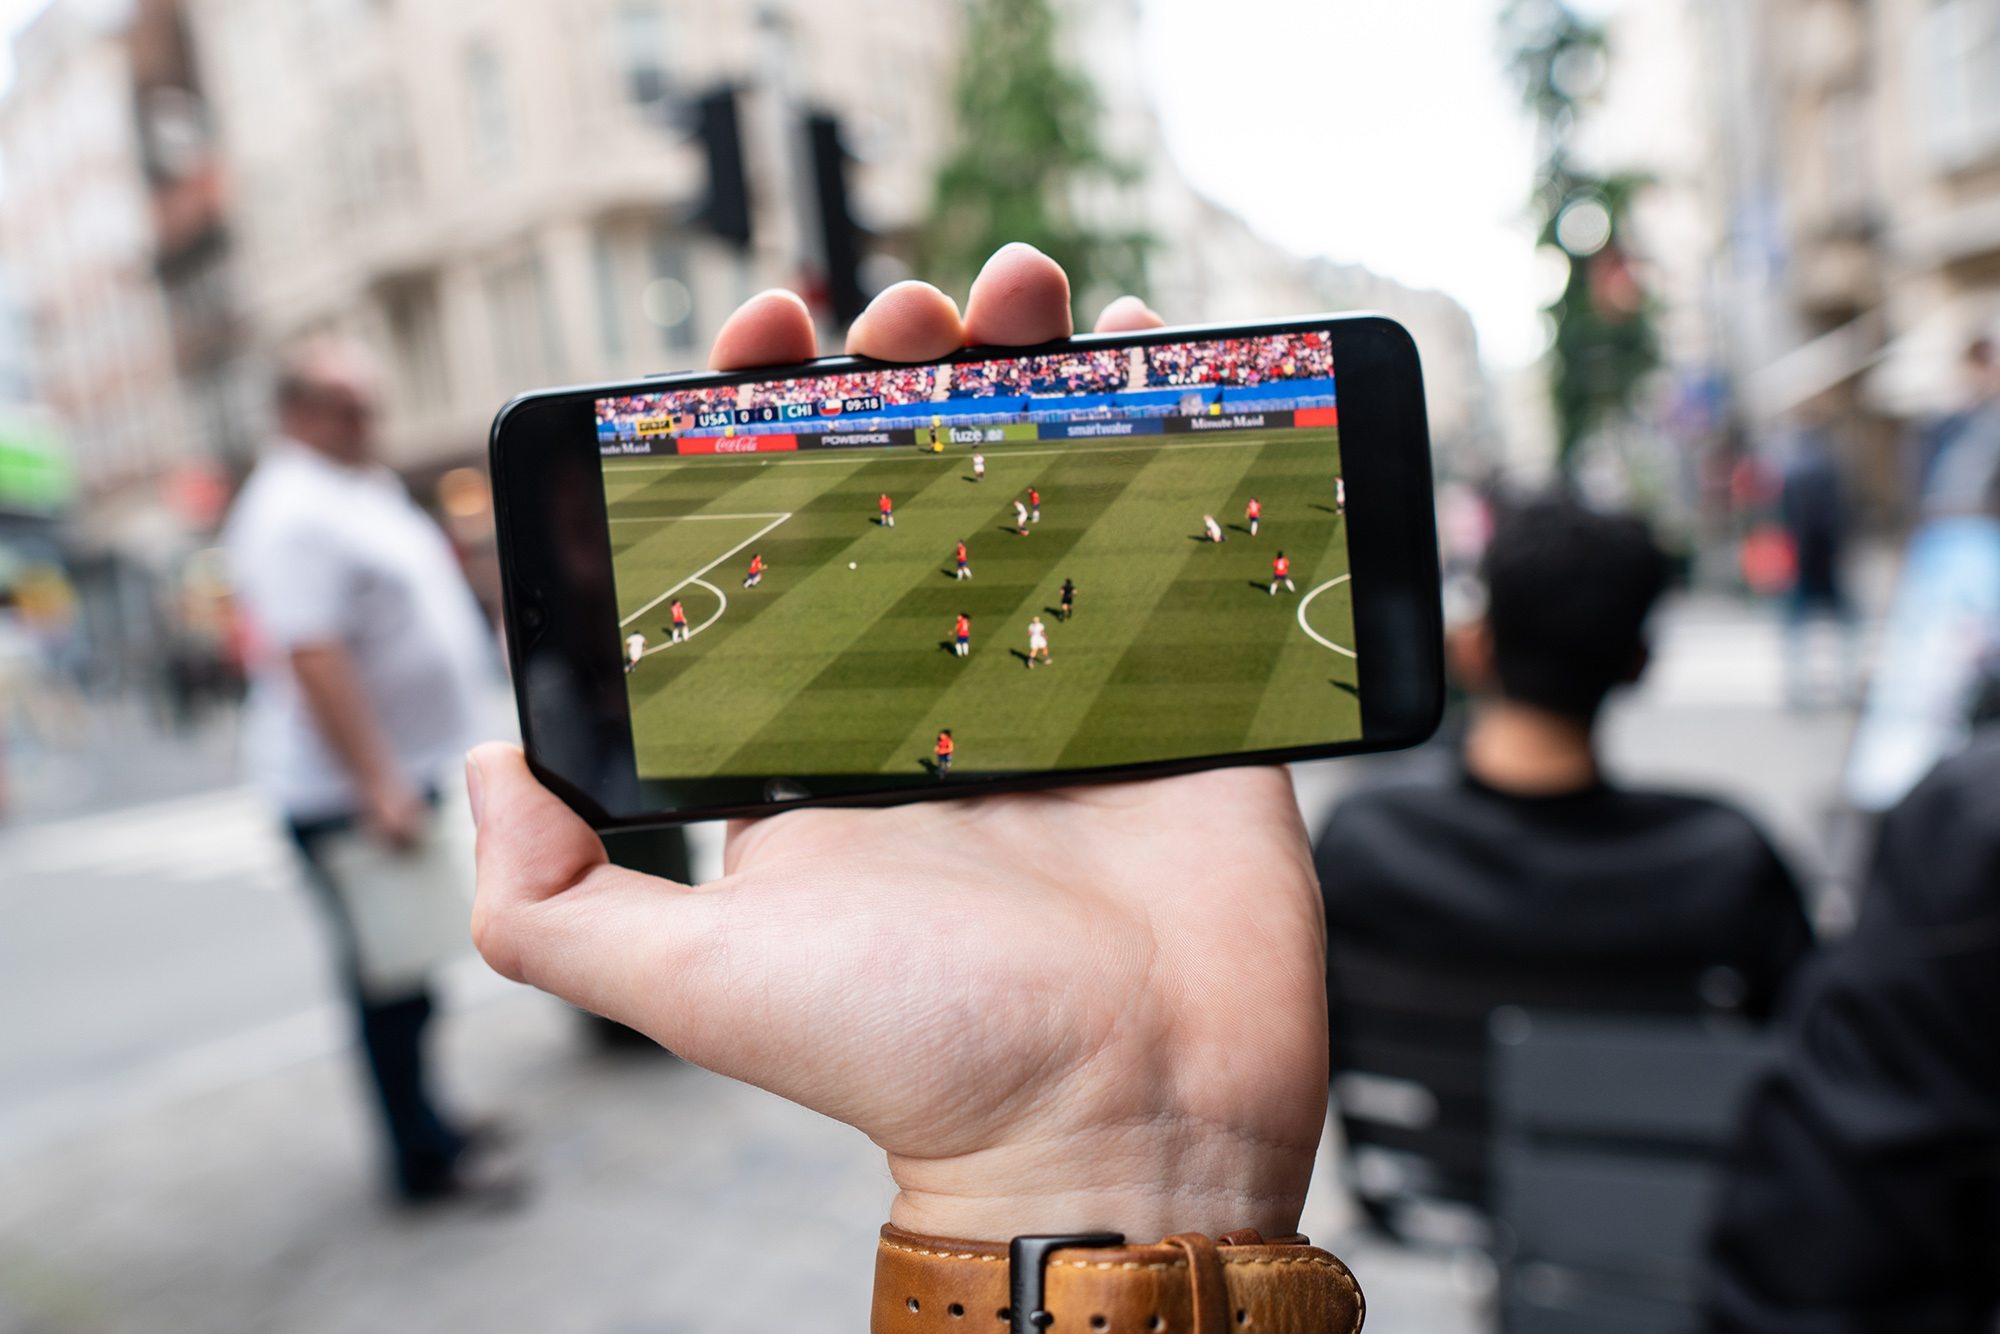 World Cup streaming via smartphone